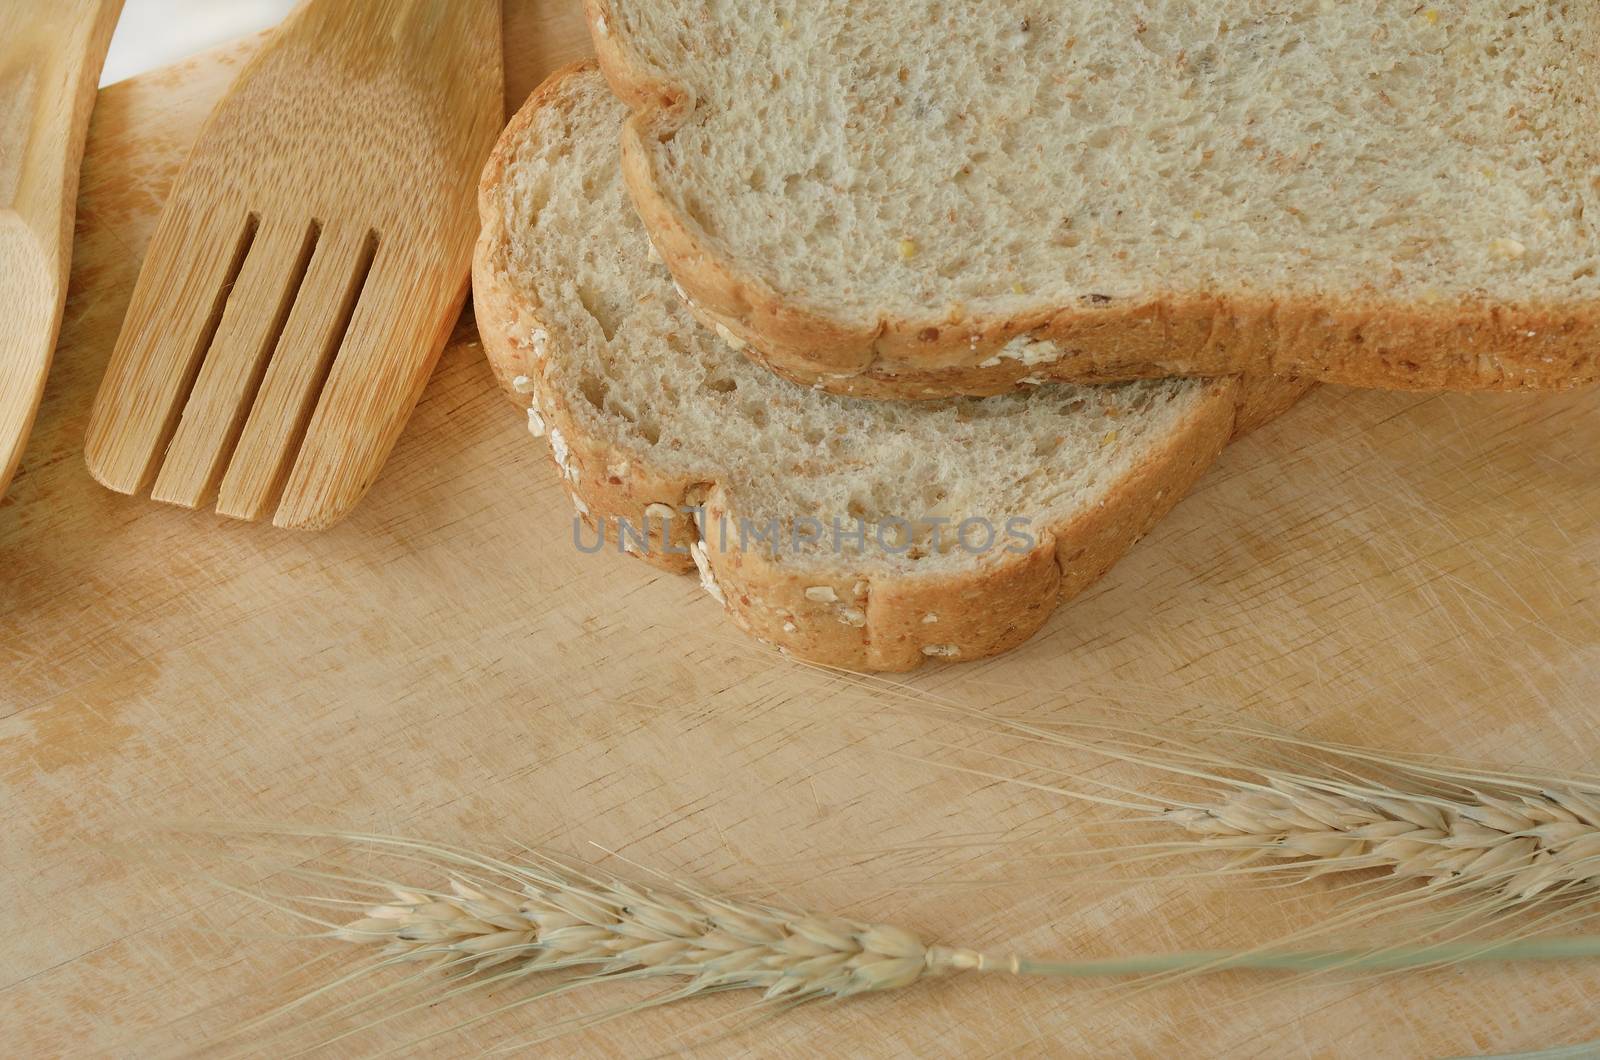 Wooden kitchen utensils with bread and barley on wooden background